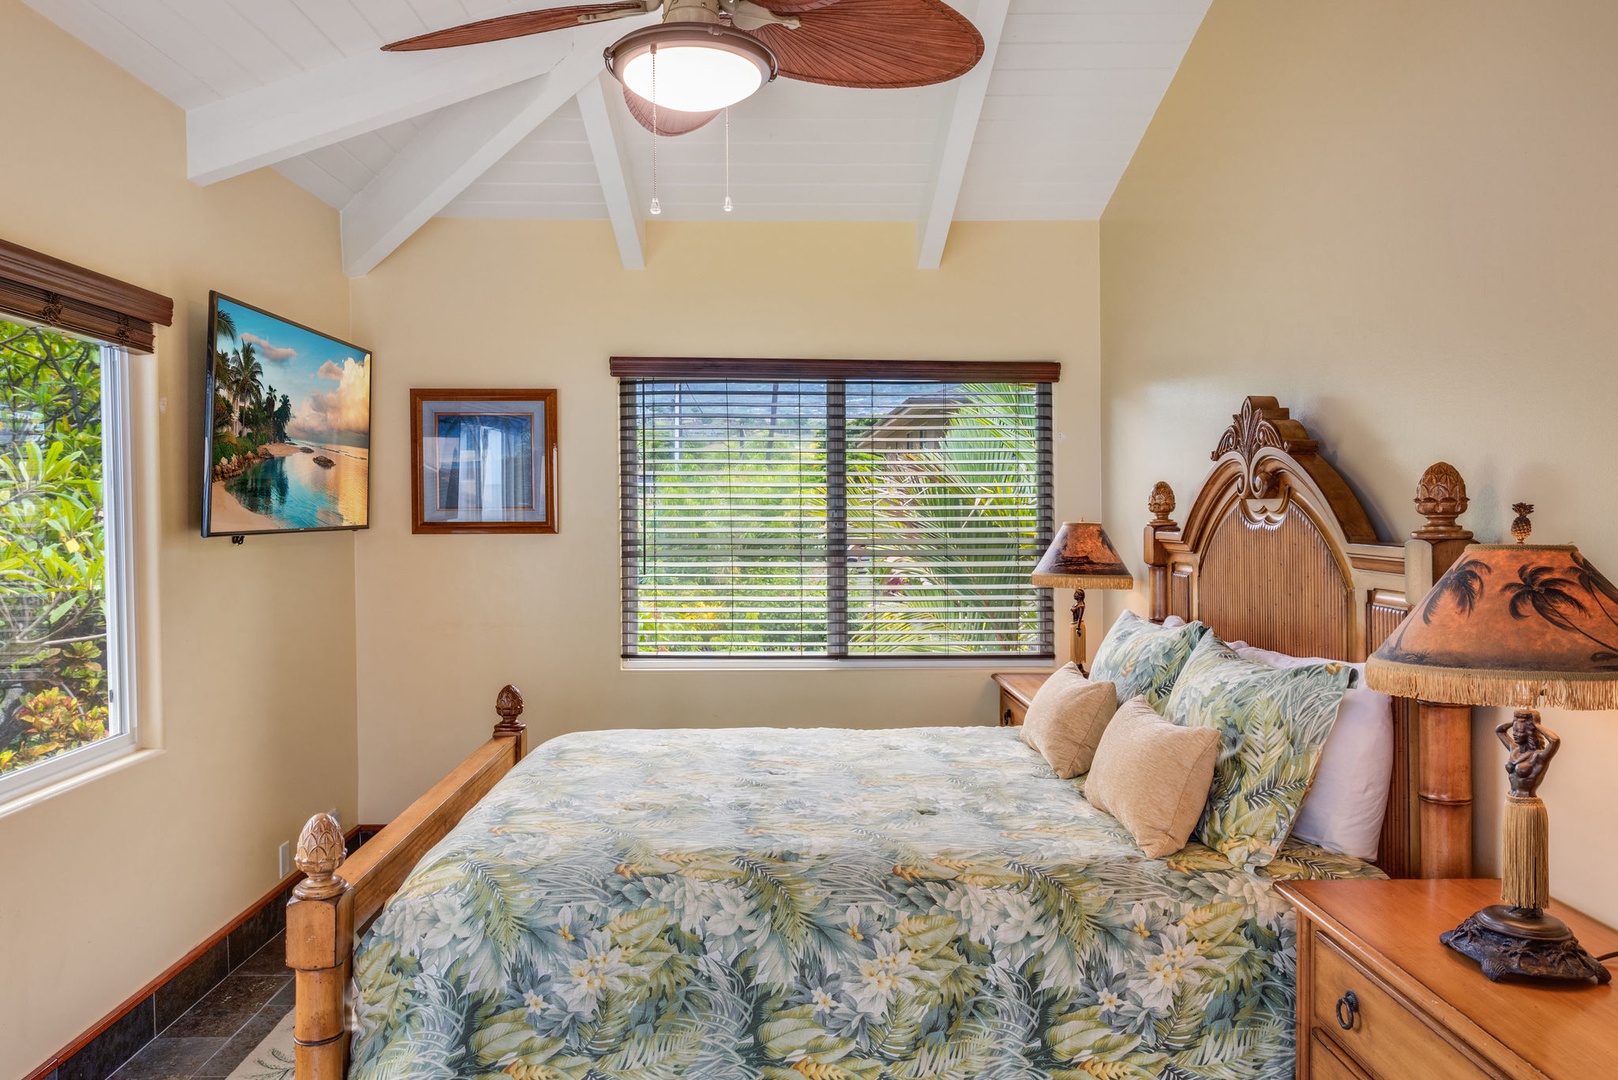 Kailua Kona Vacation Rentals, Kona Beach Bungalows** - Experience comfort in the Moana Hale Upstairs Queen room, complete with a shared bath and sweeping views.